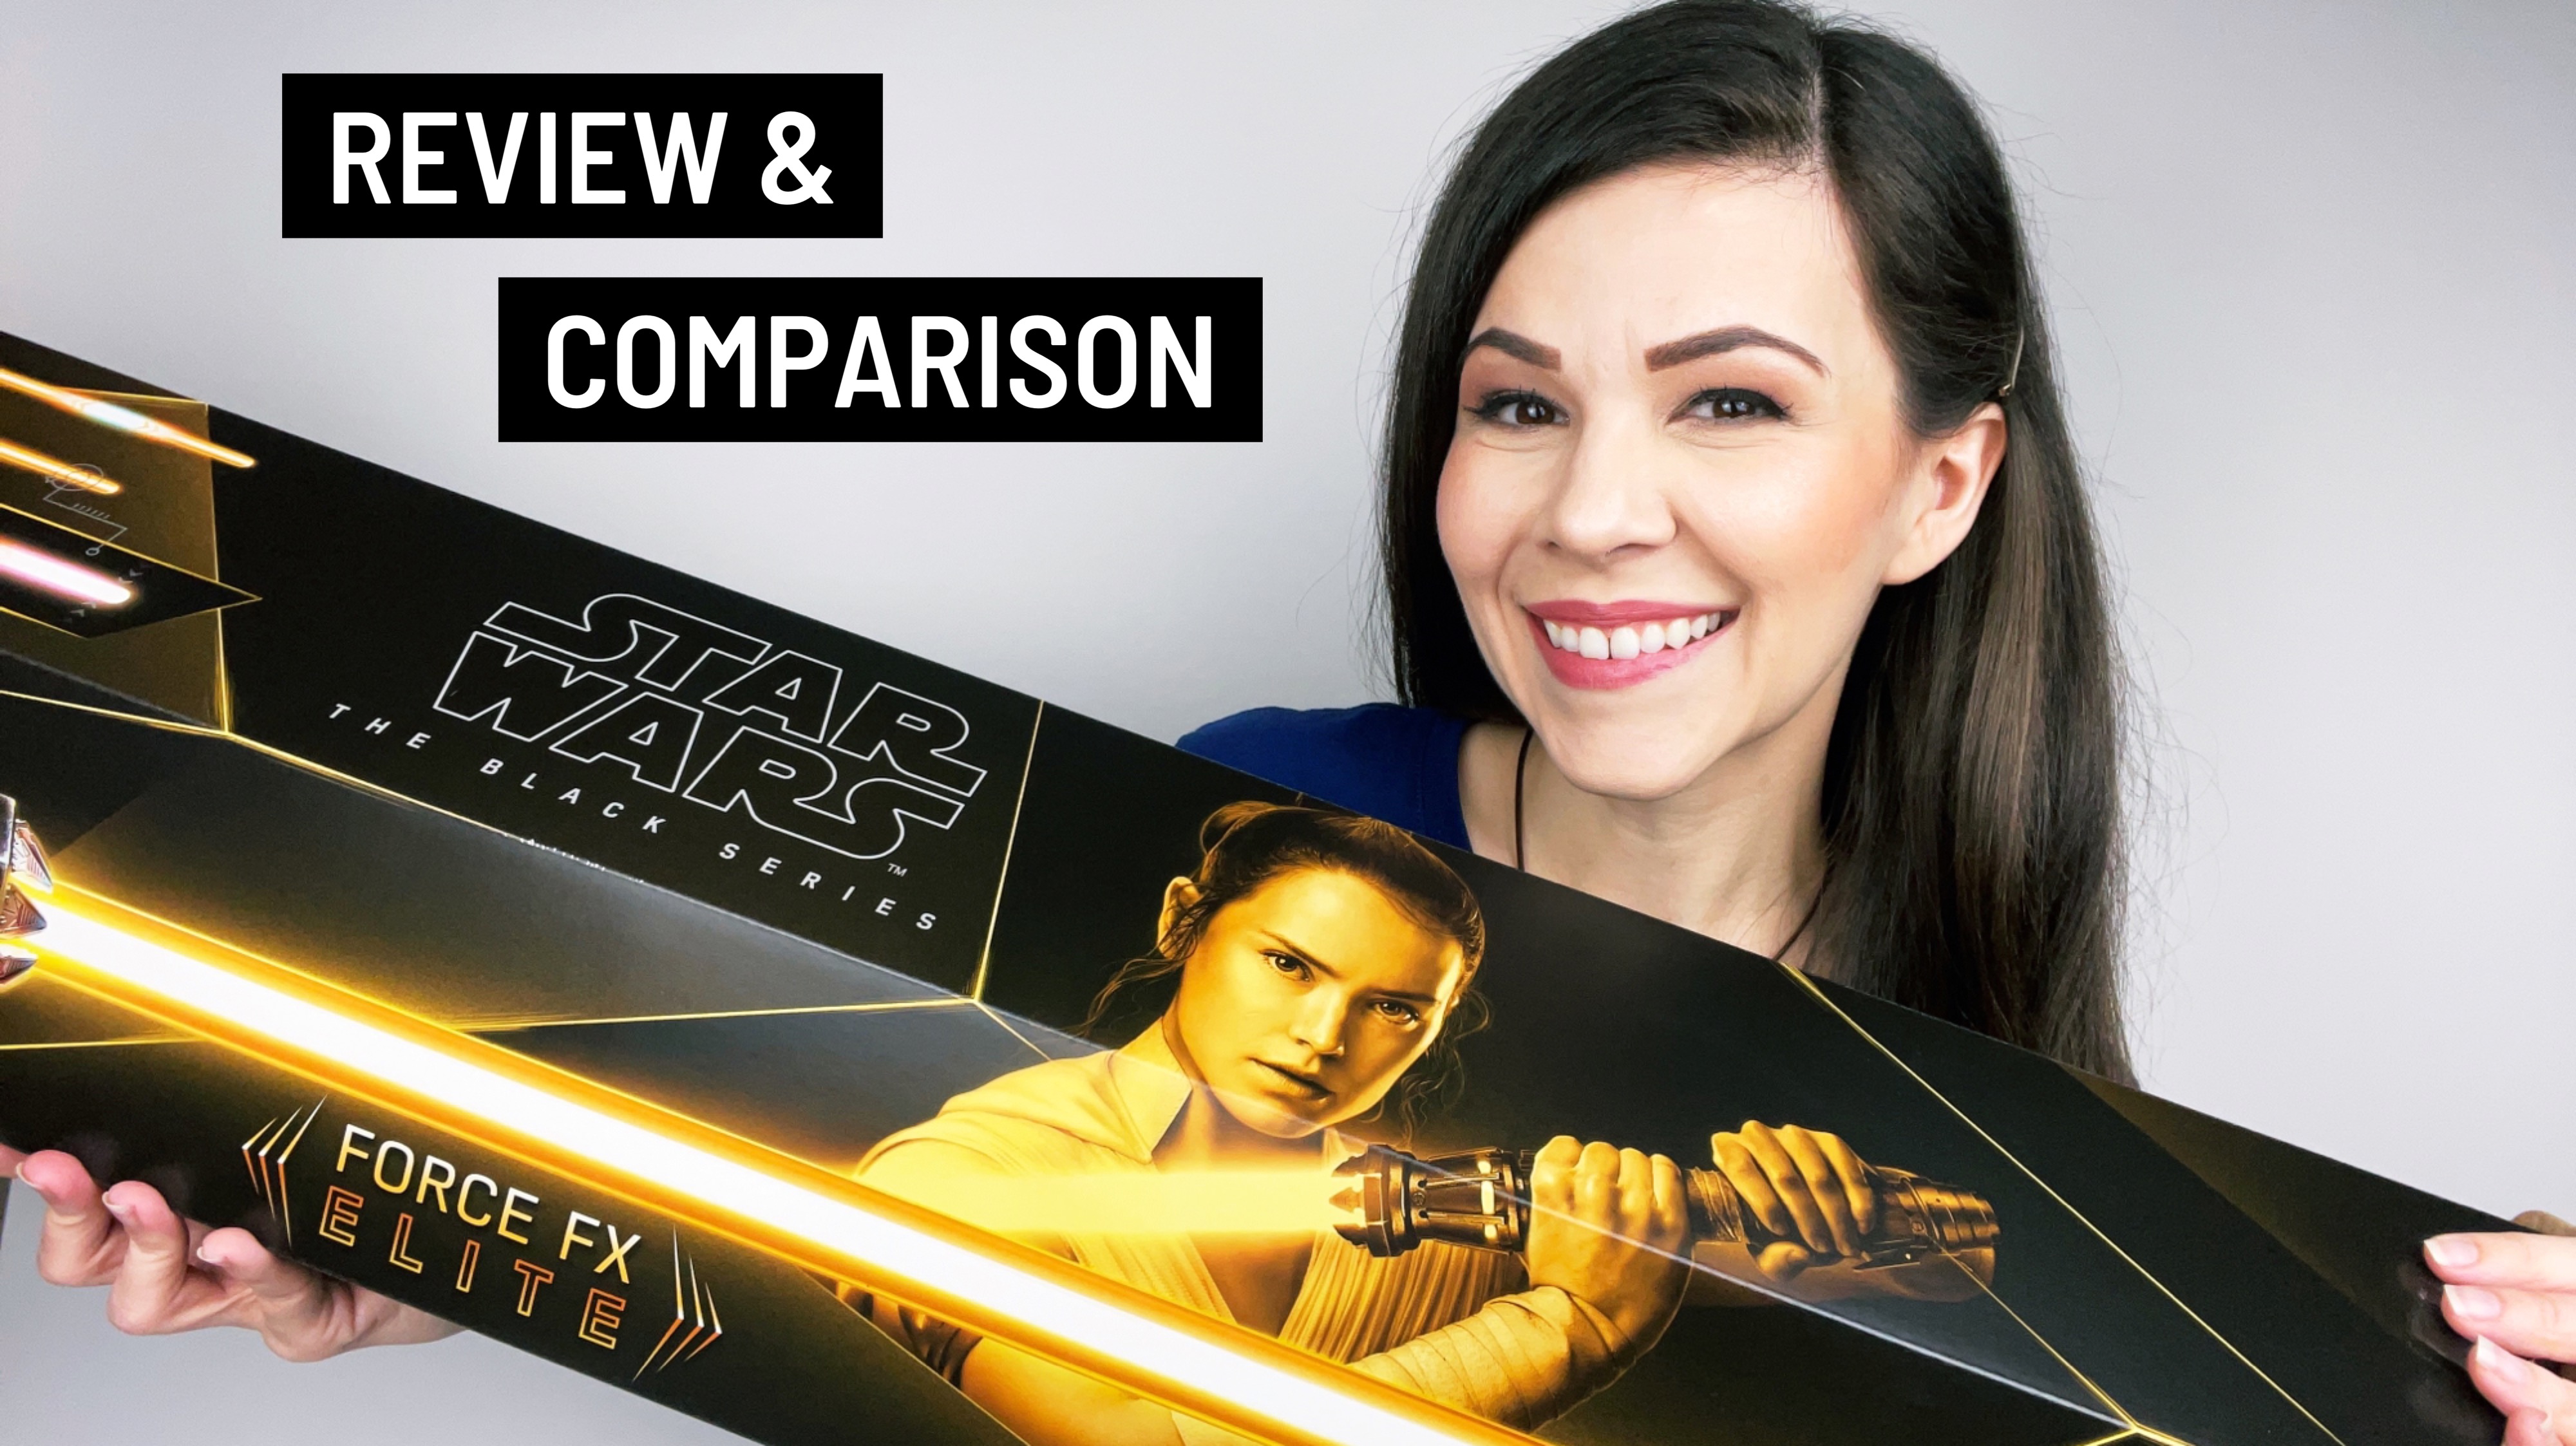 Hasbro's Rey Force FX Elite Lightsaber REVIEW & Legacy Lightsaber Comparison | Anakin and His Angel